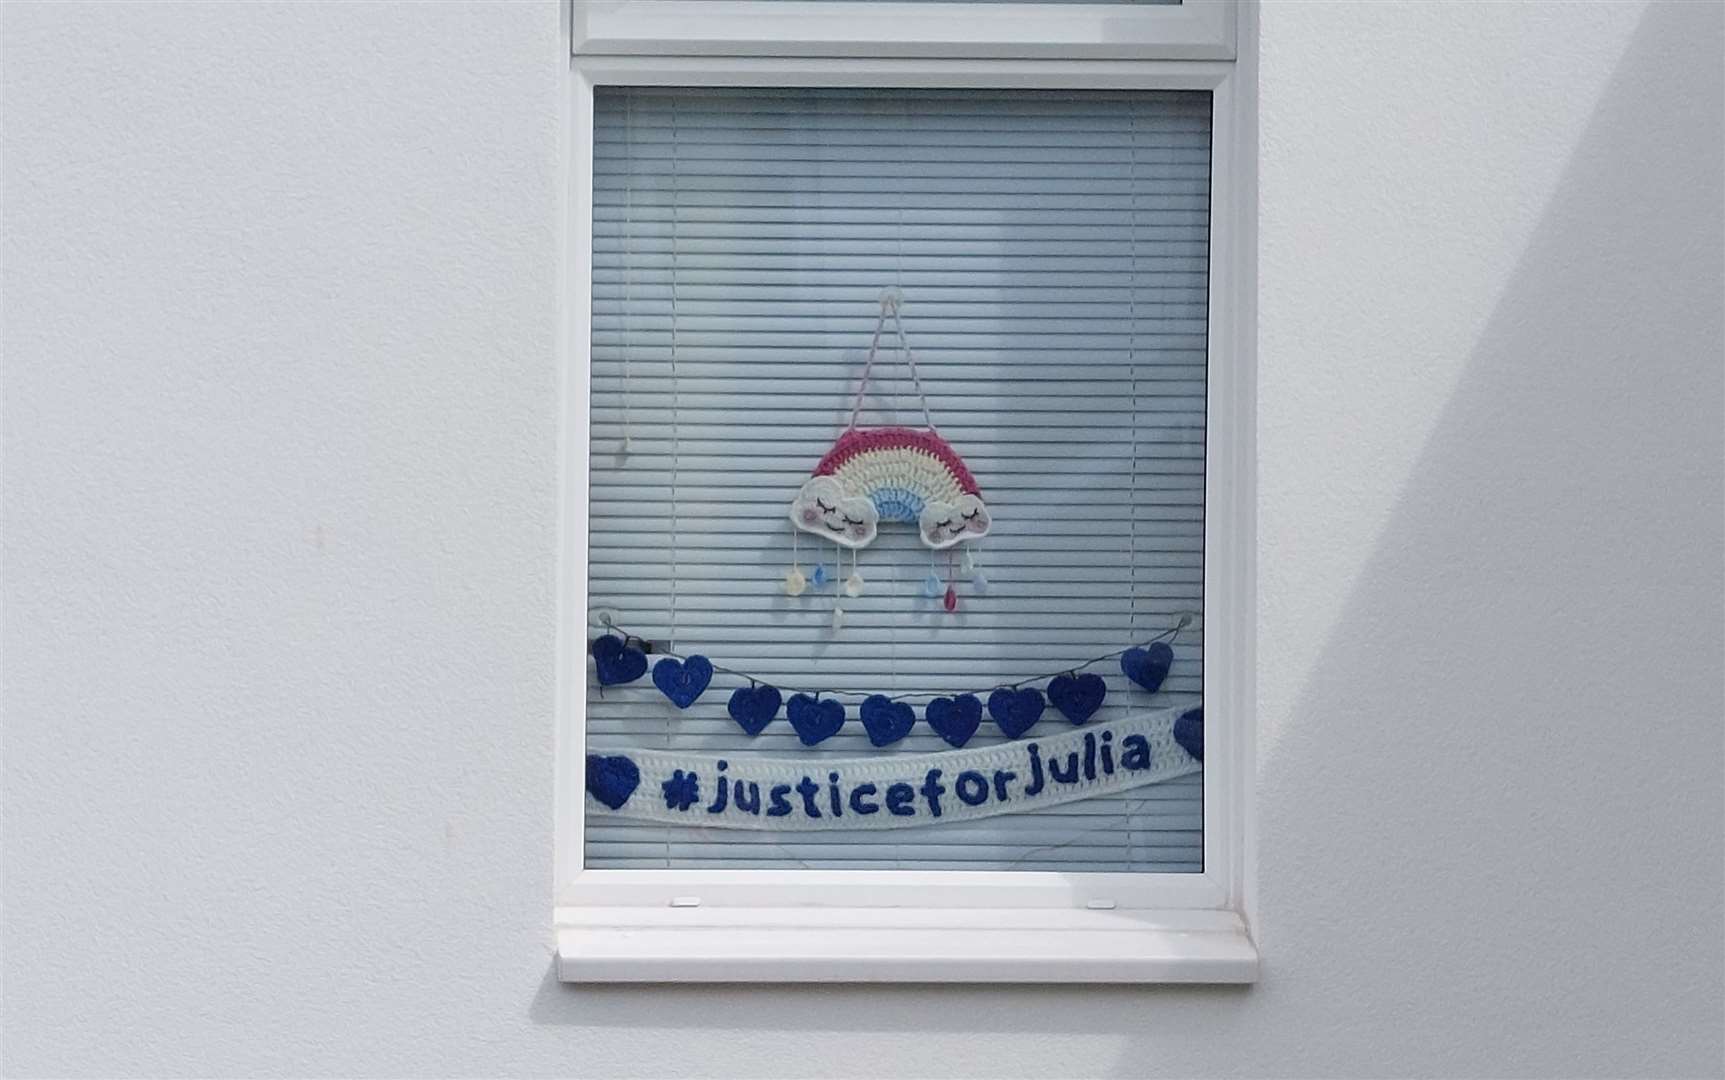 A crocheted 'justice for Julia' sign remains hung in a window in Snowdown